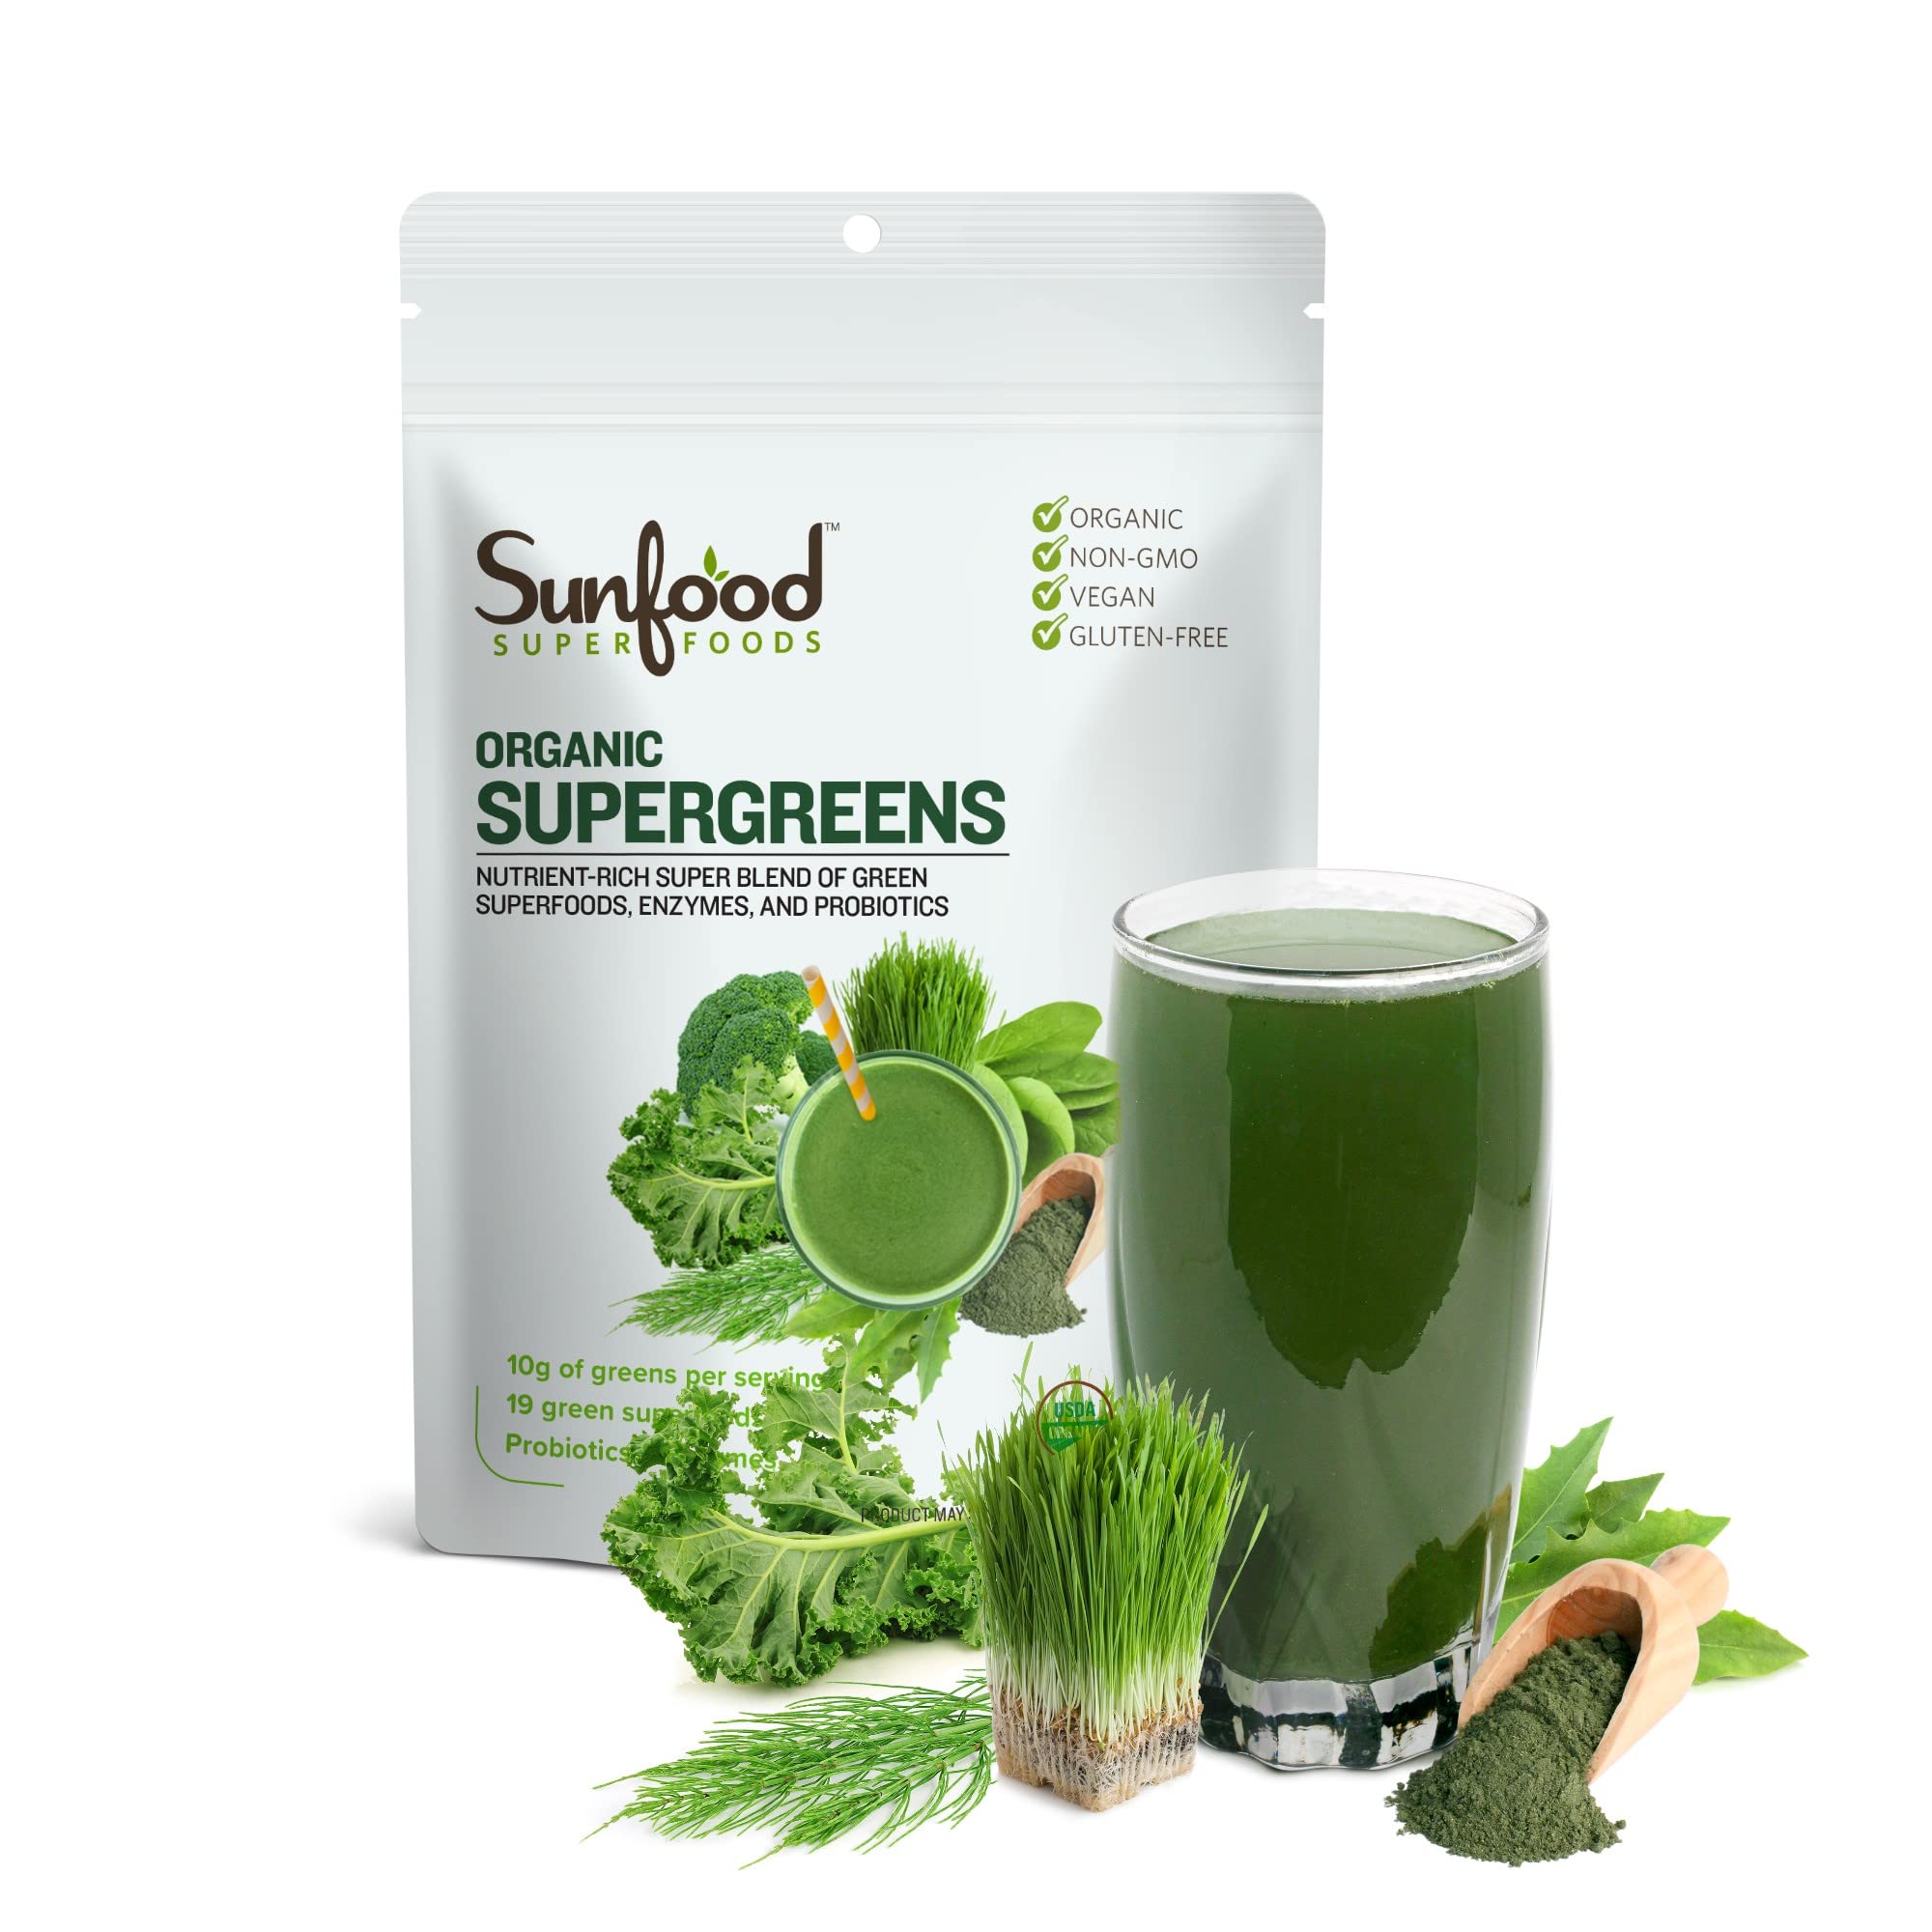 Sunfood Superfoods Super Greens Powder | 8 oz, 22 Servings | Organic Green Juice/Smoothie Mix w/Digestive Enzymes & Probiotic for Gut Health